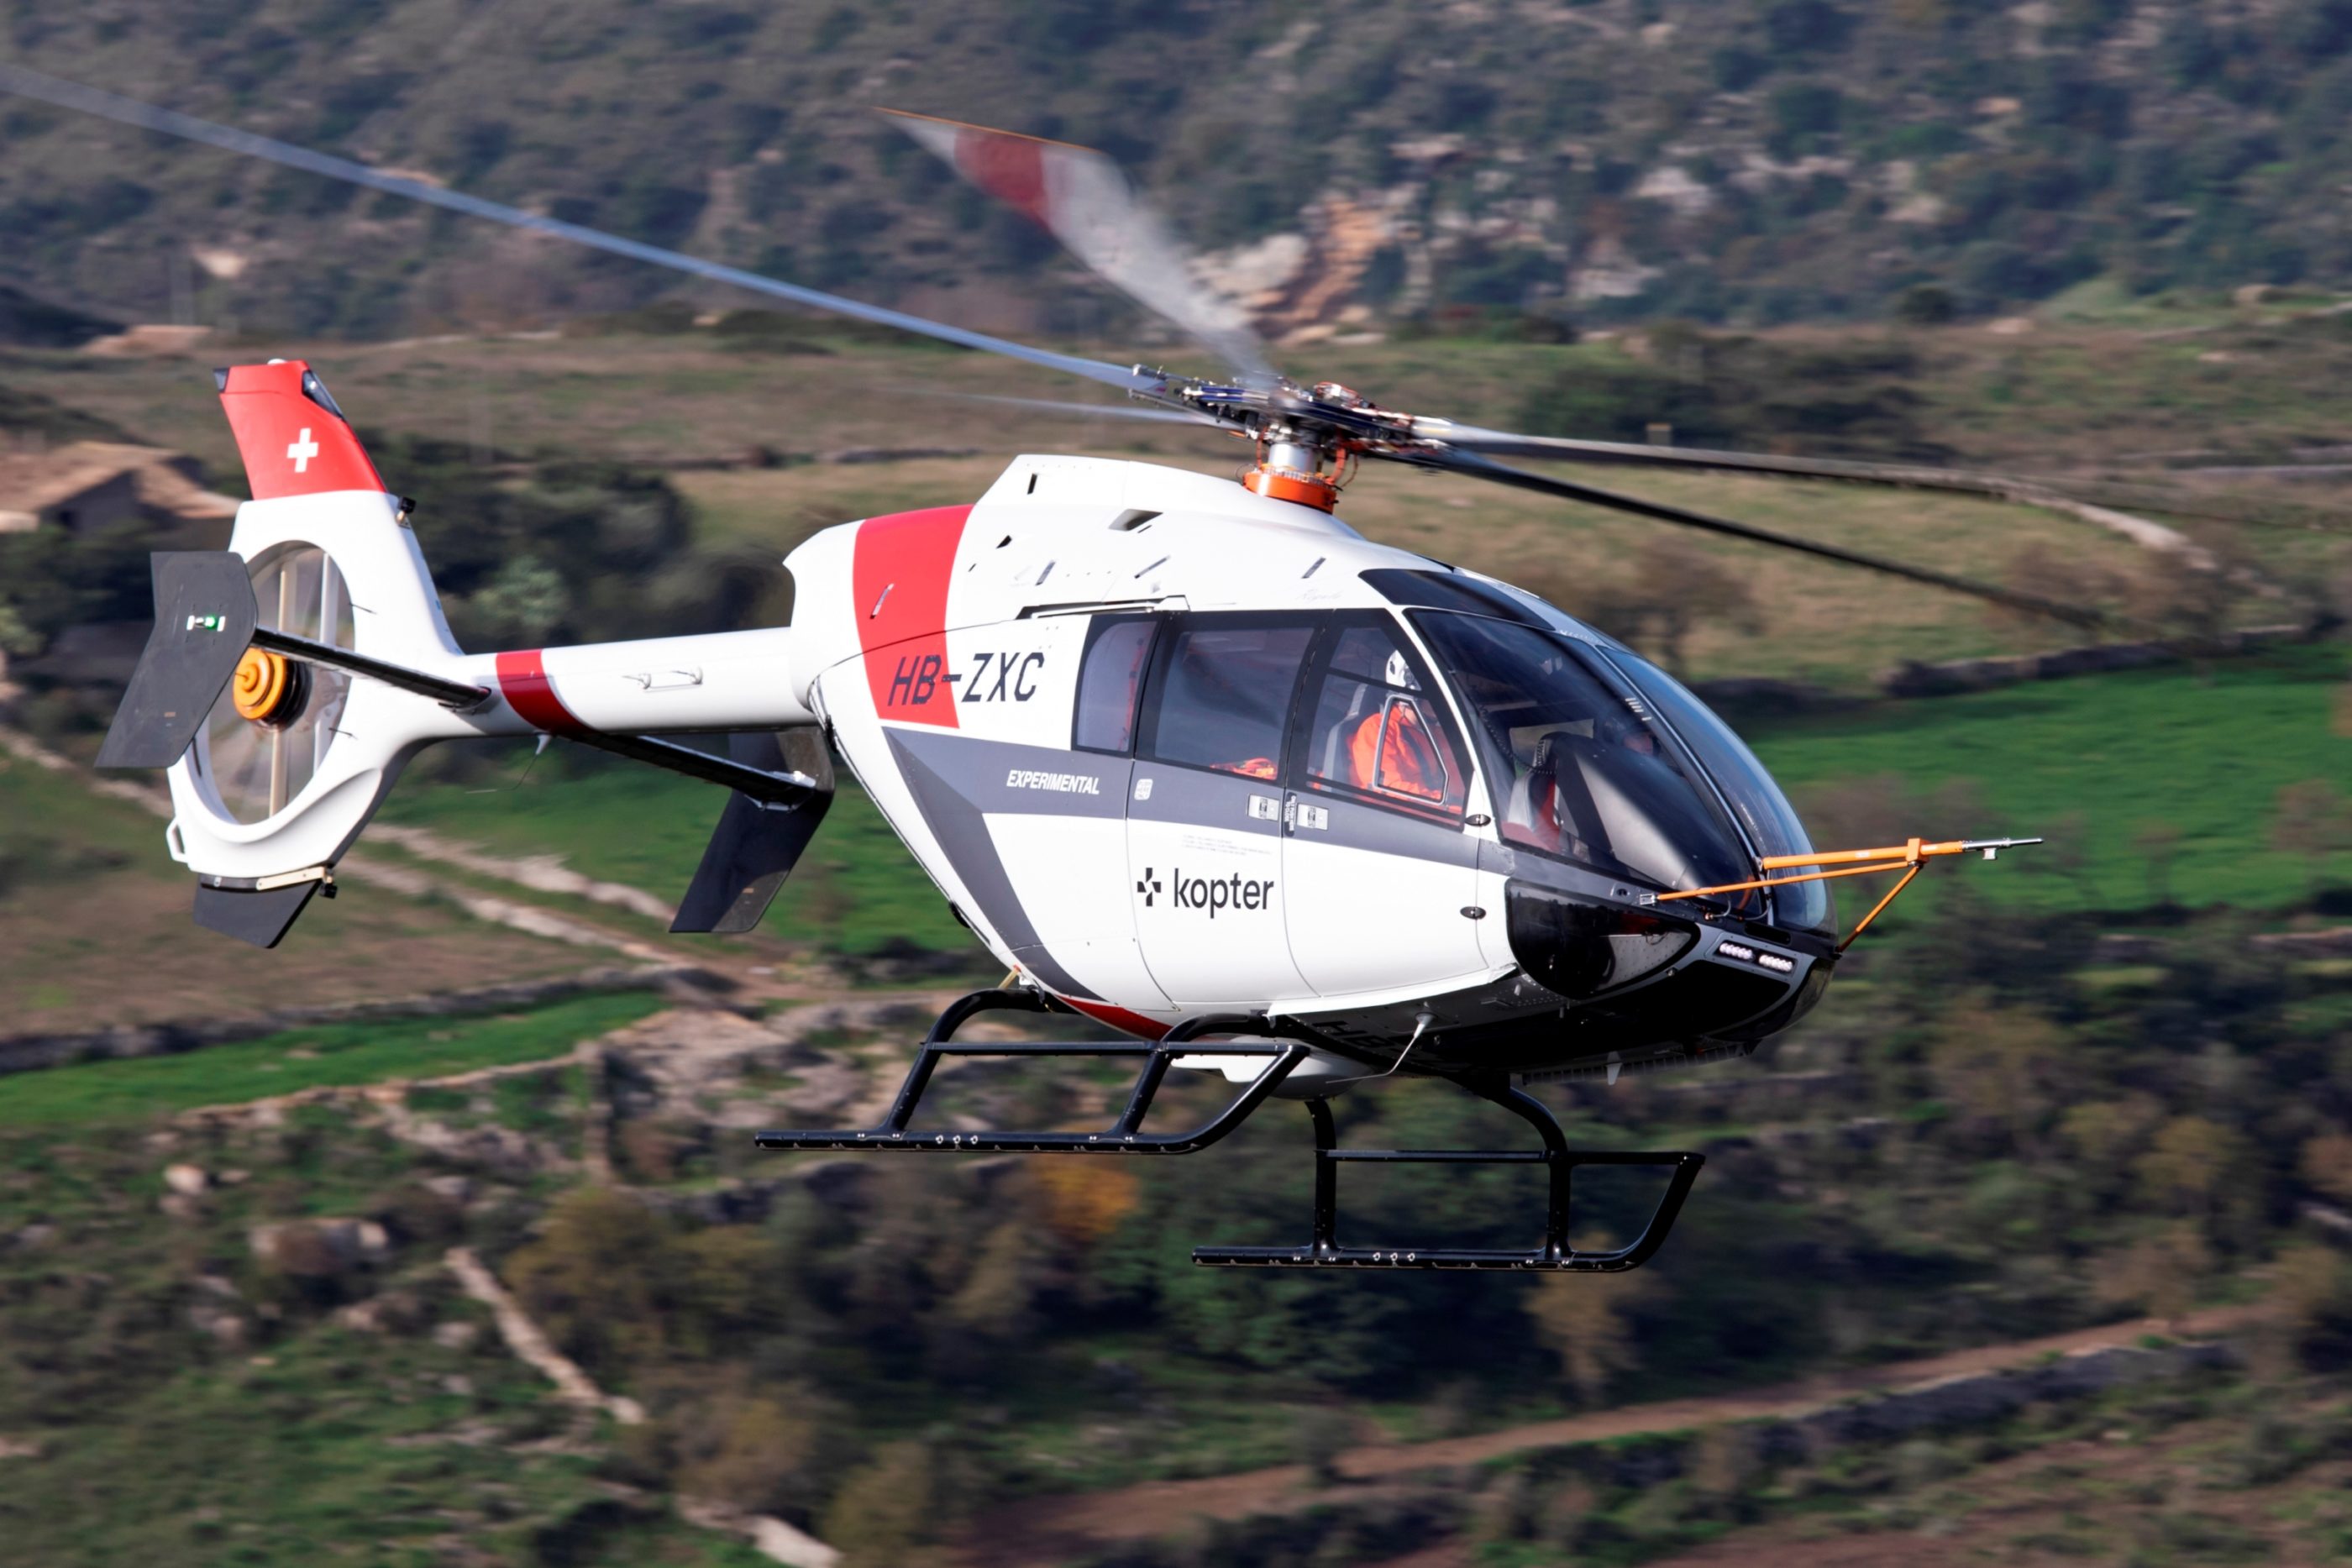 SH09 manufacturer Kopter is to be acquired by Leonardo, with the transaction set to be finalized by the end of the first quarter of 2020. Leonardo Photo